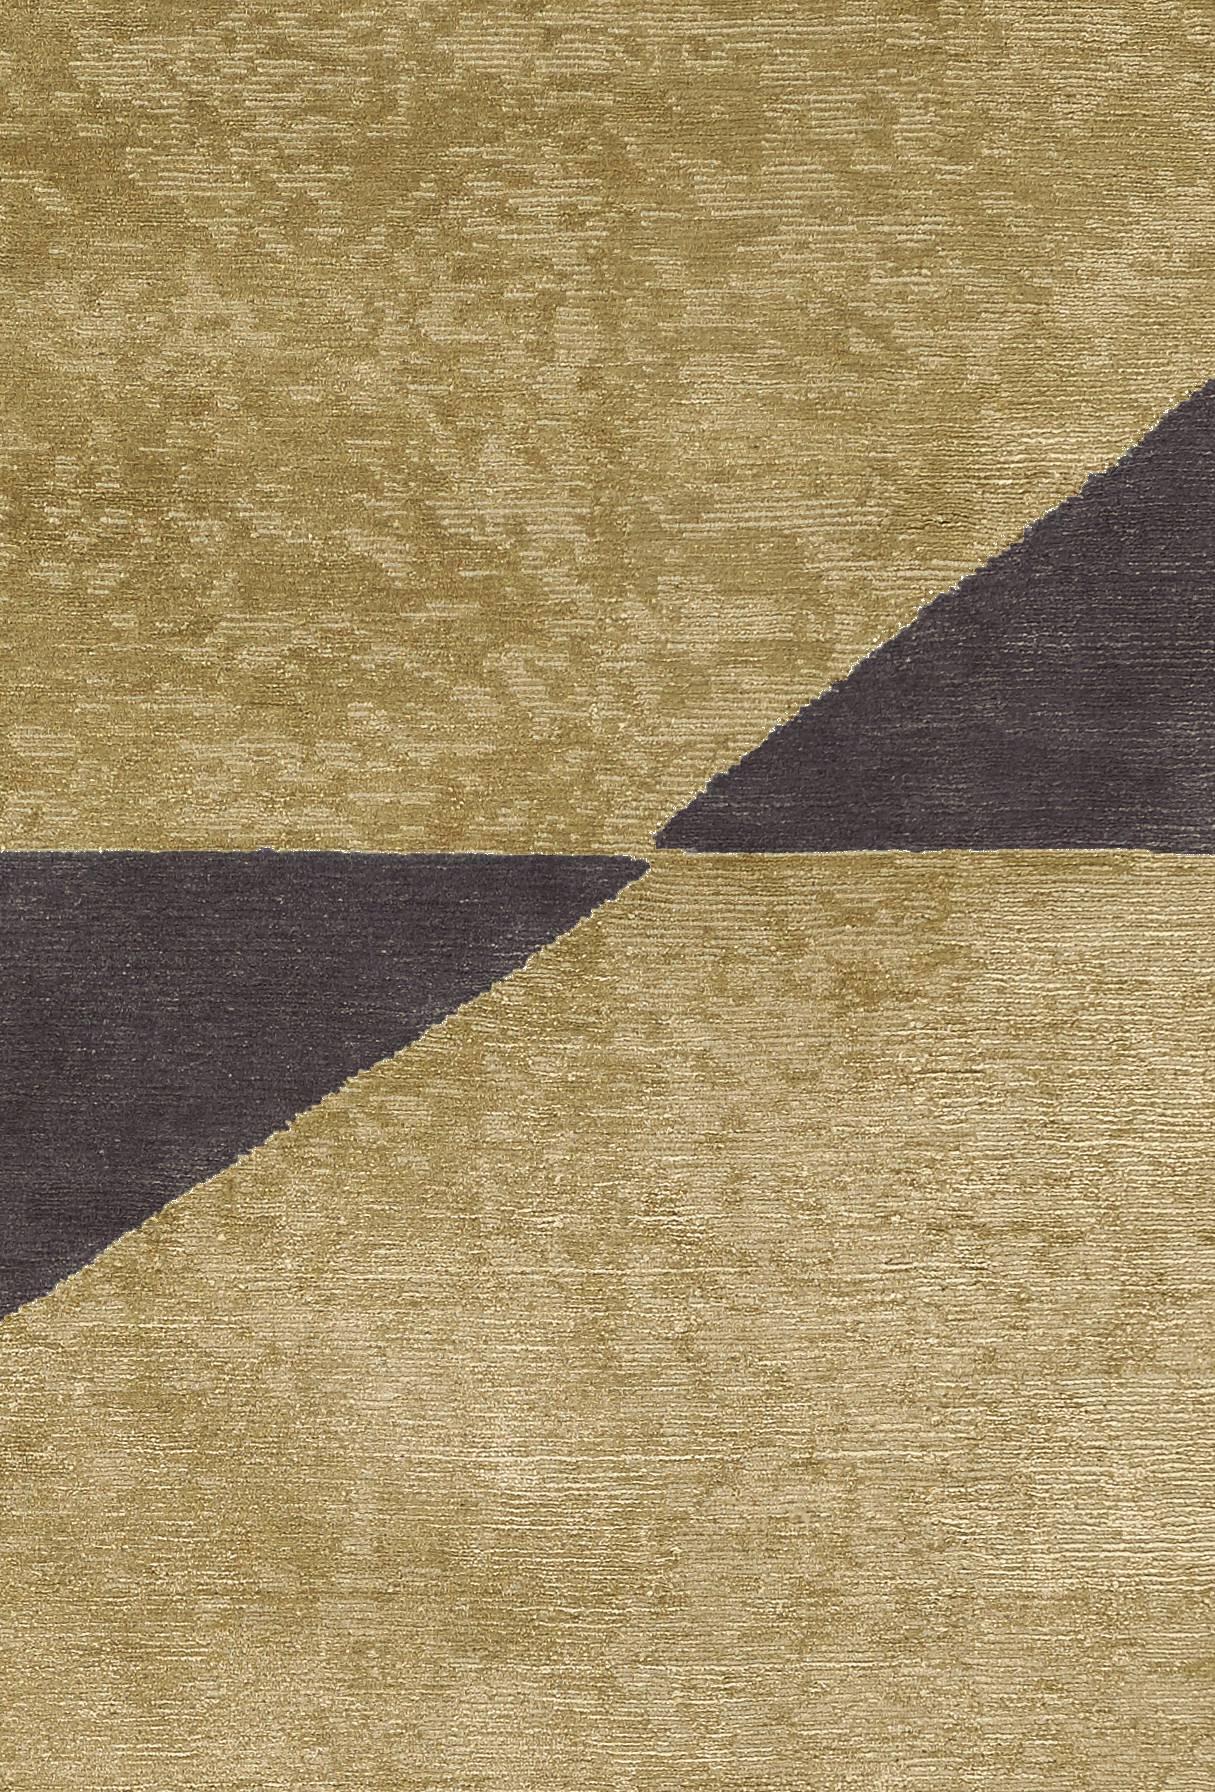 Luxurious Komo rug is made of silk and wool (65-35%) and it has a varying loop and cut texture.
The colors are dark gold and purple-brown.
Low pile (5-6 mm). Quality: 100 knots by square inch.
Hand-knotted in Nepal.
 